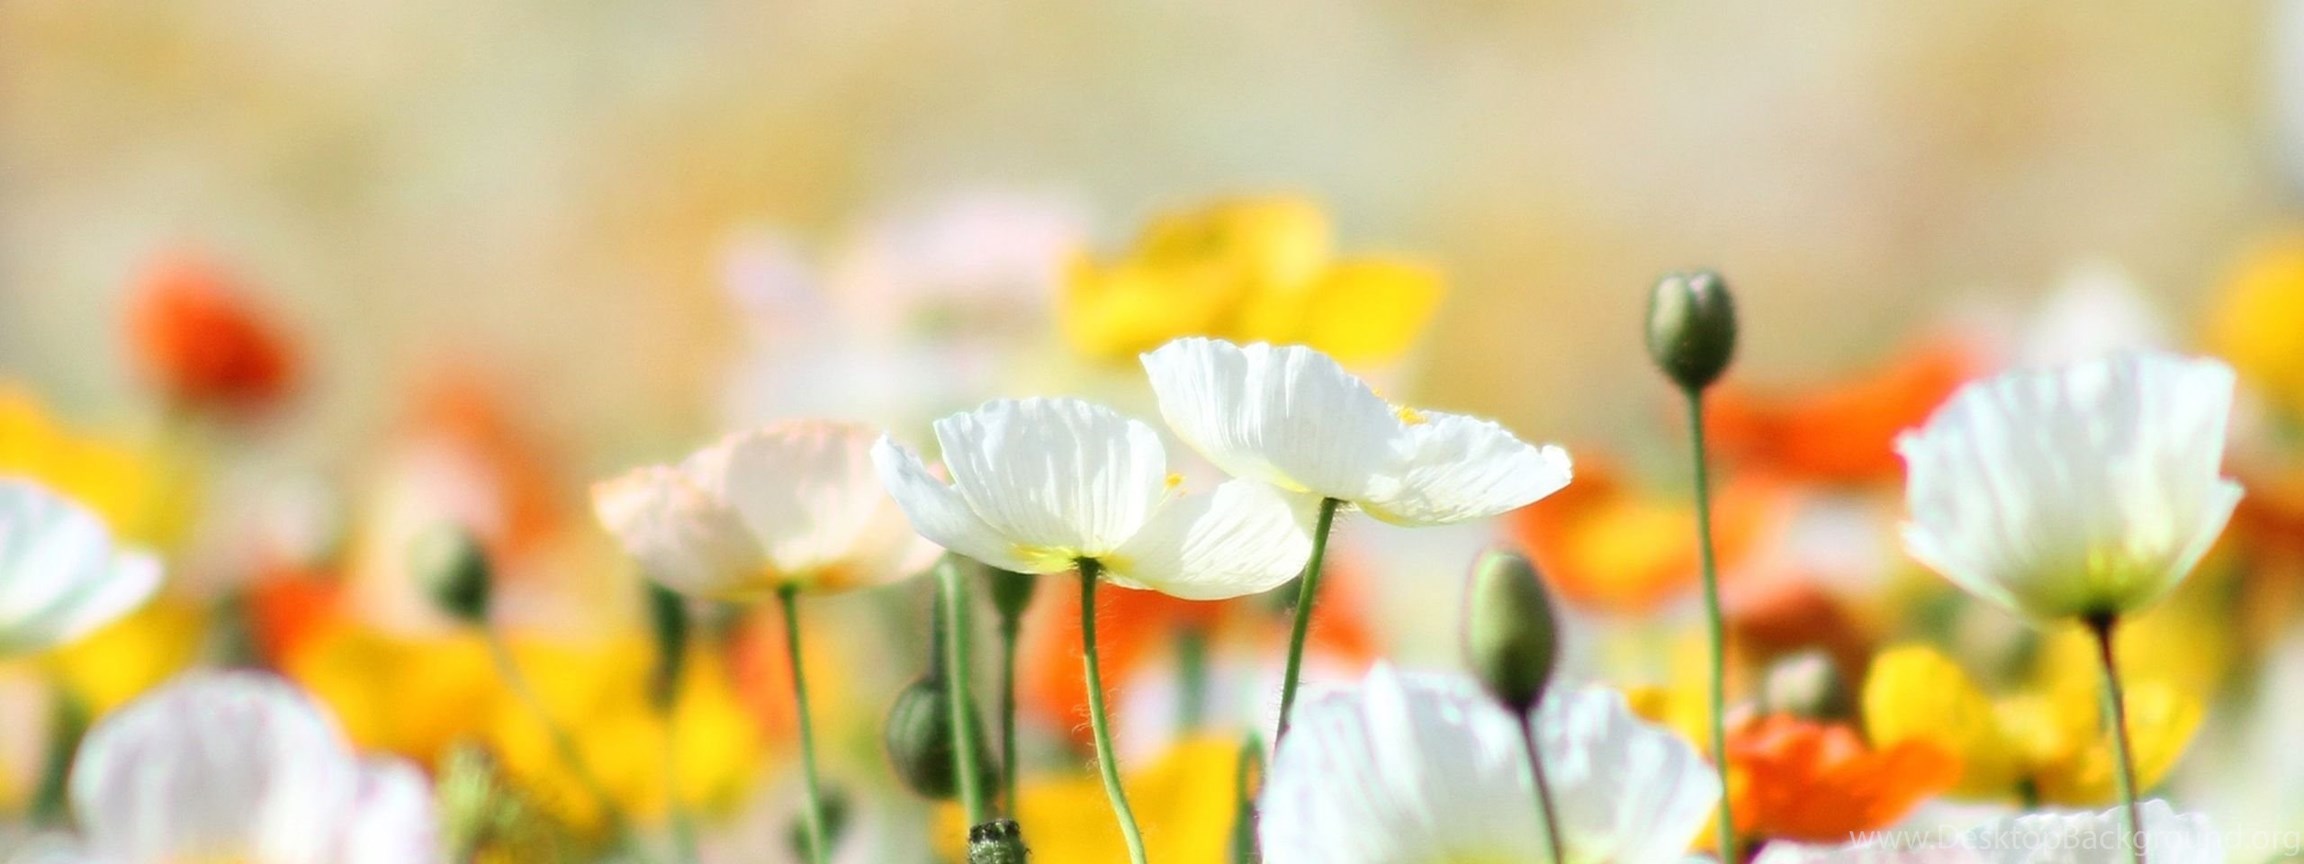 Download Download Wonderful White Flowers Wallpapers 1383 2560x1600 Px High...